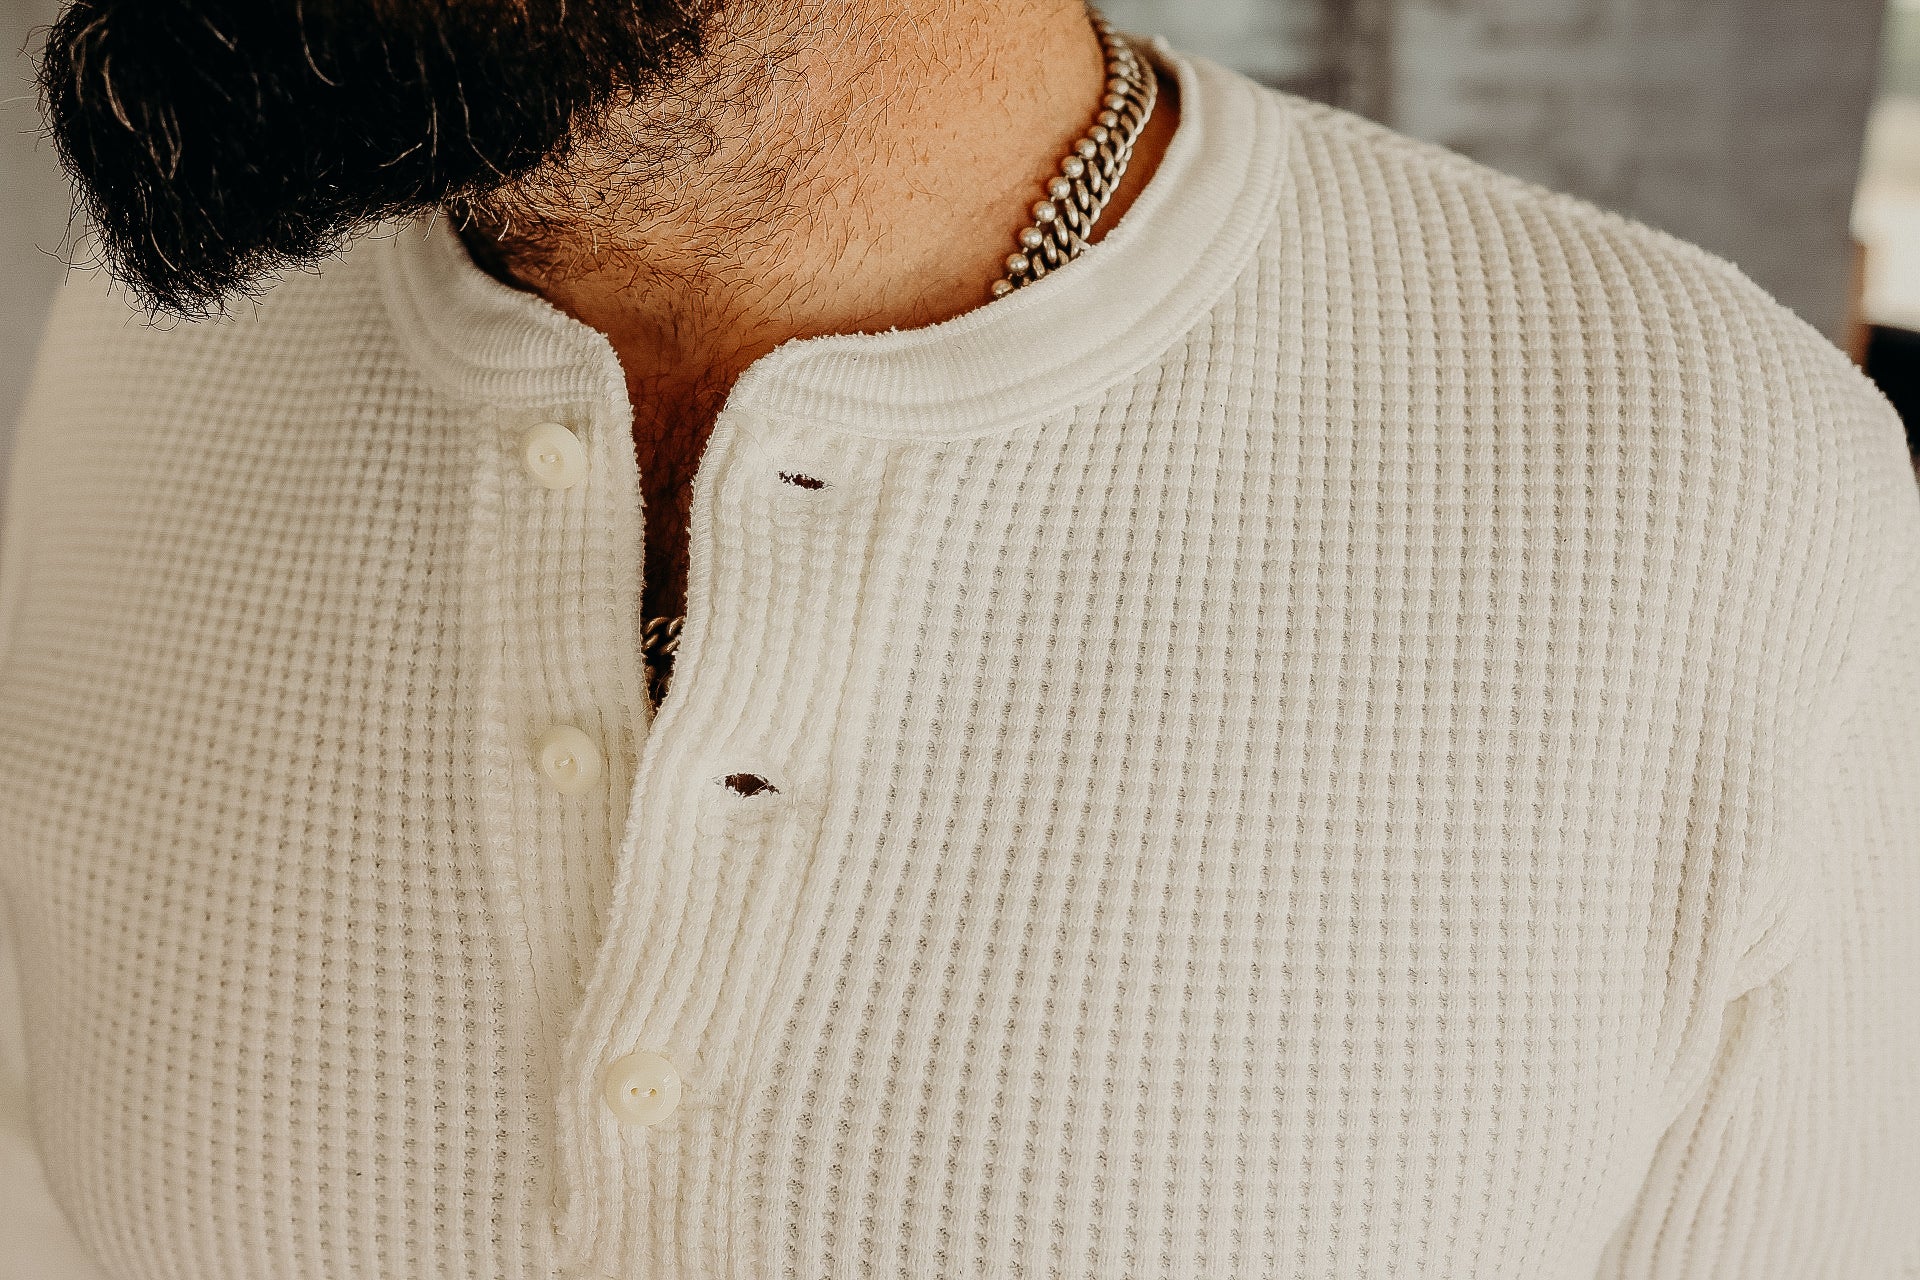 Big Waffle Thermal Henley- White